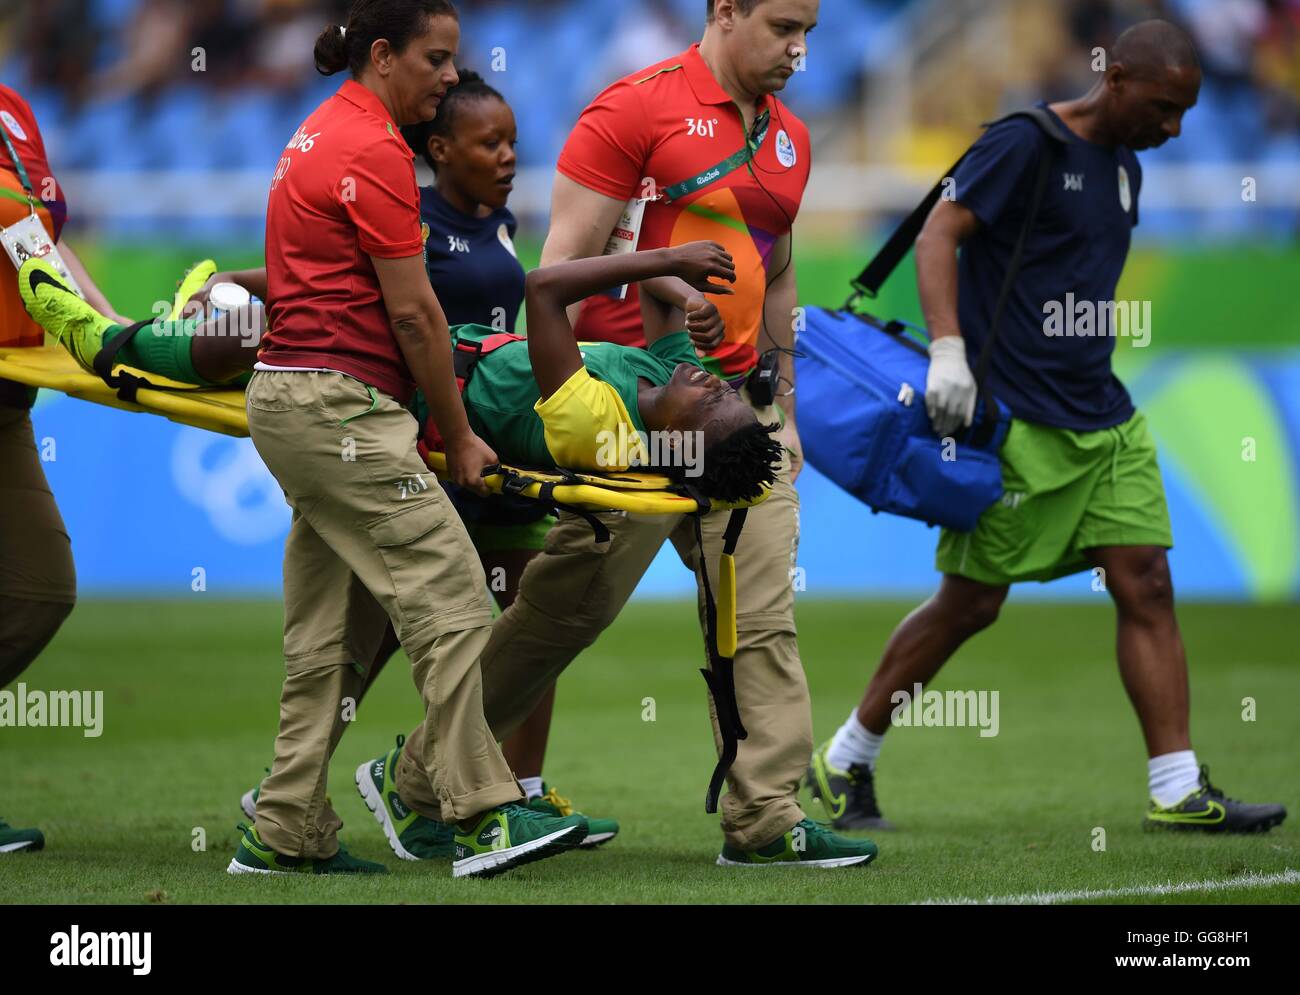 Rio De Janeiro, Brazil. 3rd Aug, 2016. Makhabane Mamello of South Africa (C) is stretchered off the pitch during the opening match of the women's Olympic football competitions between South Africa and Sweden at the Olympic Stadium in Rio de Janeiro, Brazil, Aug. 3, 2016. Sweden won 1-0. © Lin Yiguang/Xinhua/Alamy Live News Stock Photo